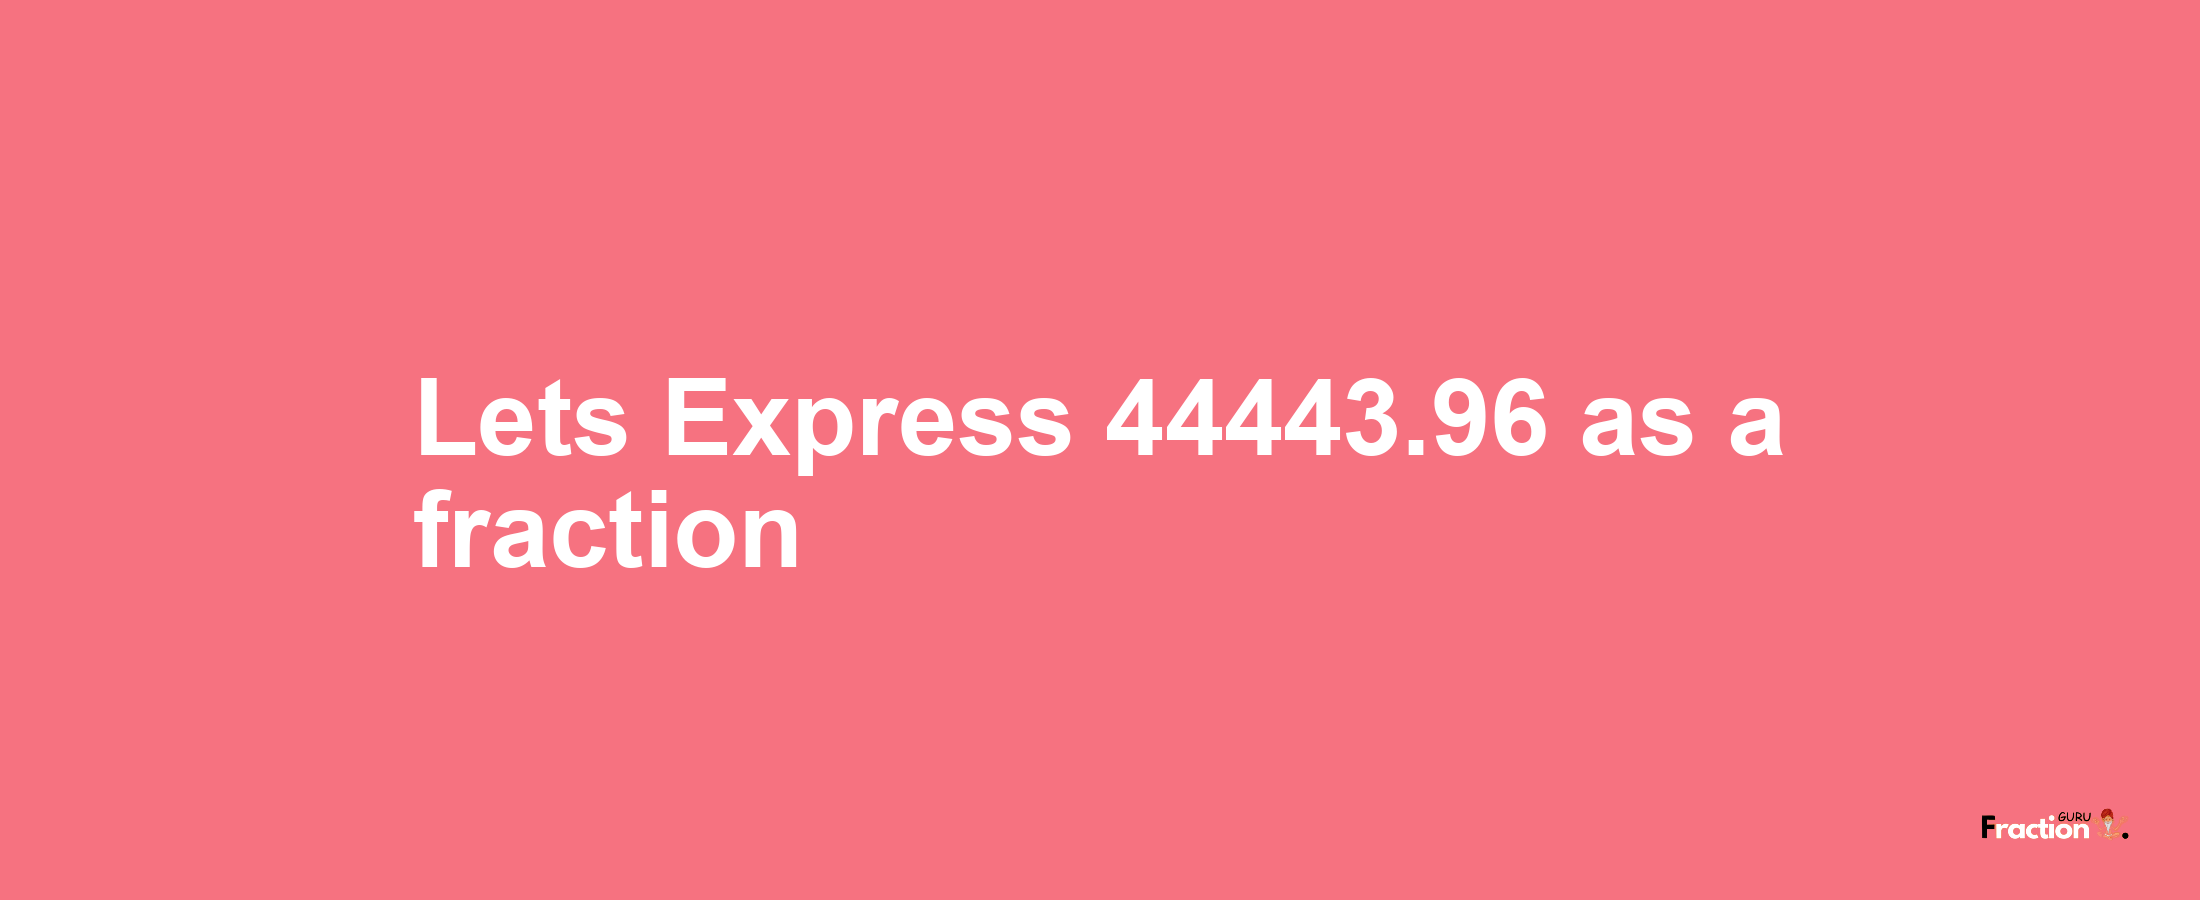 Lets Express 44443.96 as afraction